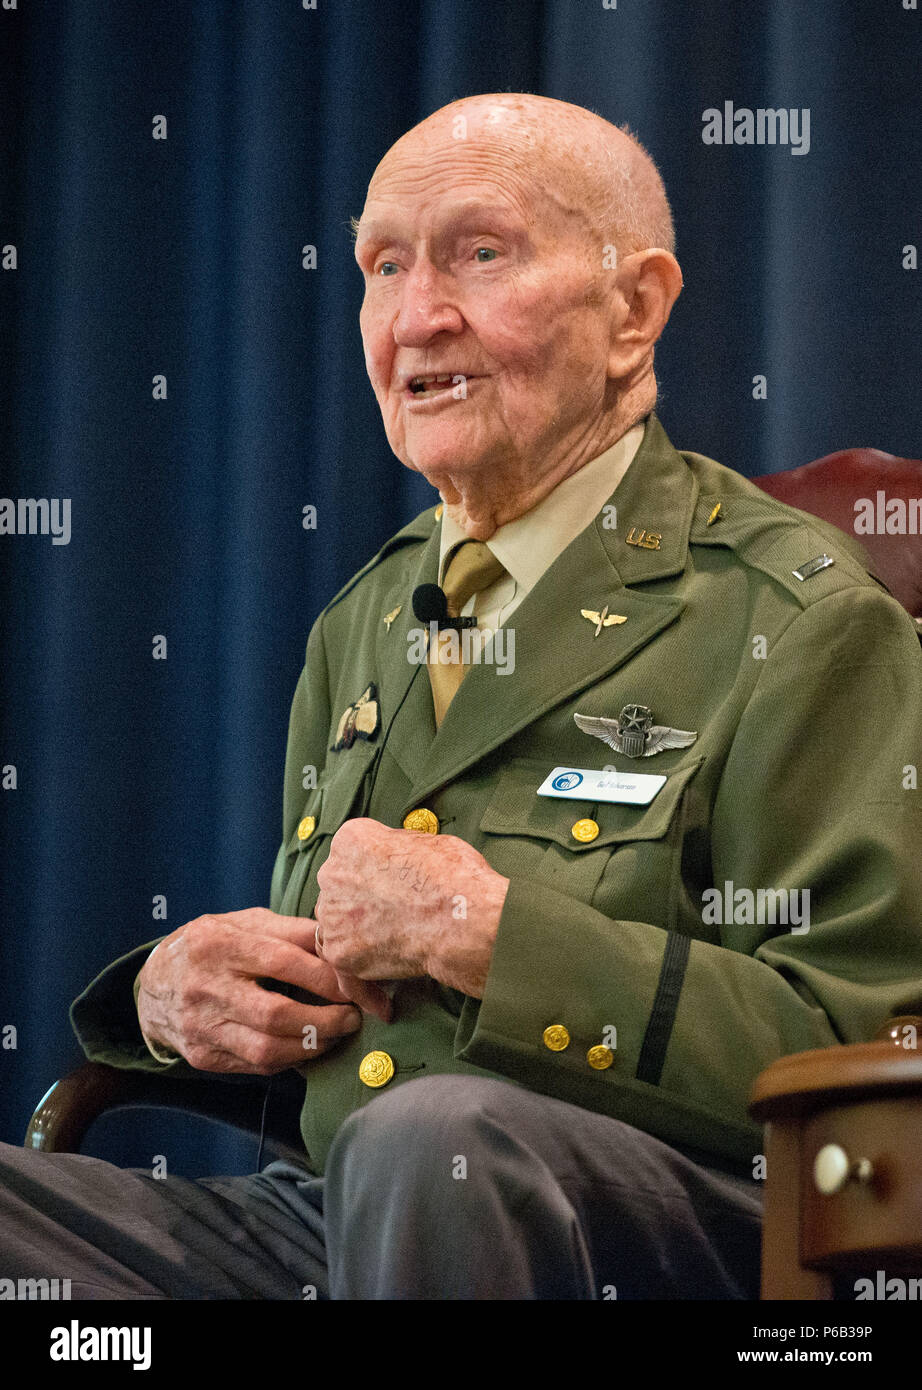 Maxwell AFB, AL - Retired Col. Gail S. Halvorsen, 2016 Gathering of Eagles  honoree, discusses his experiences while serving during the Berlin Airlift,  during the Air Command and Staff College's 2016 Gathering